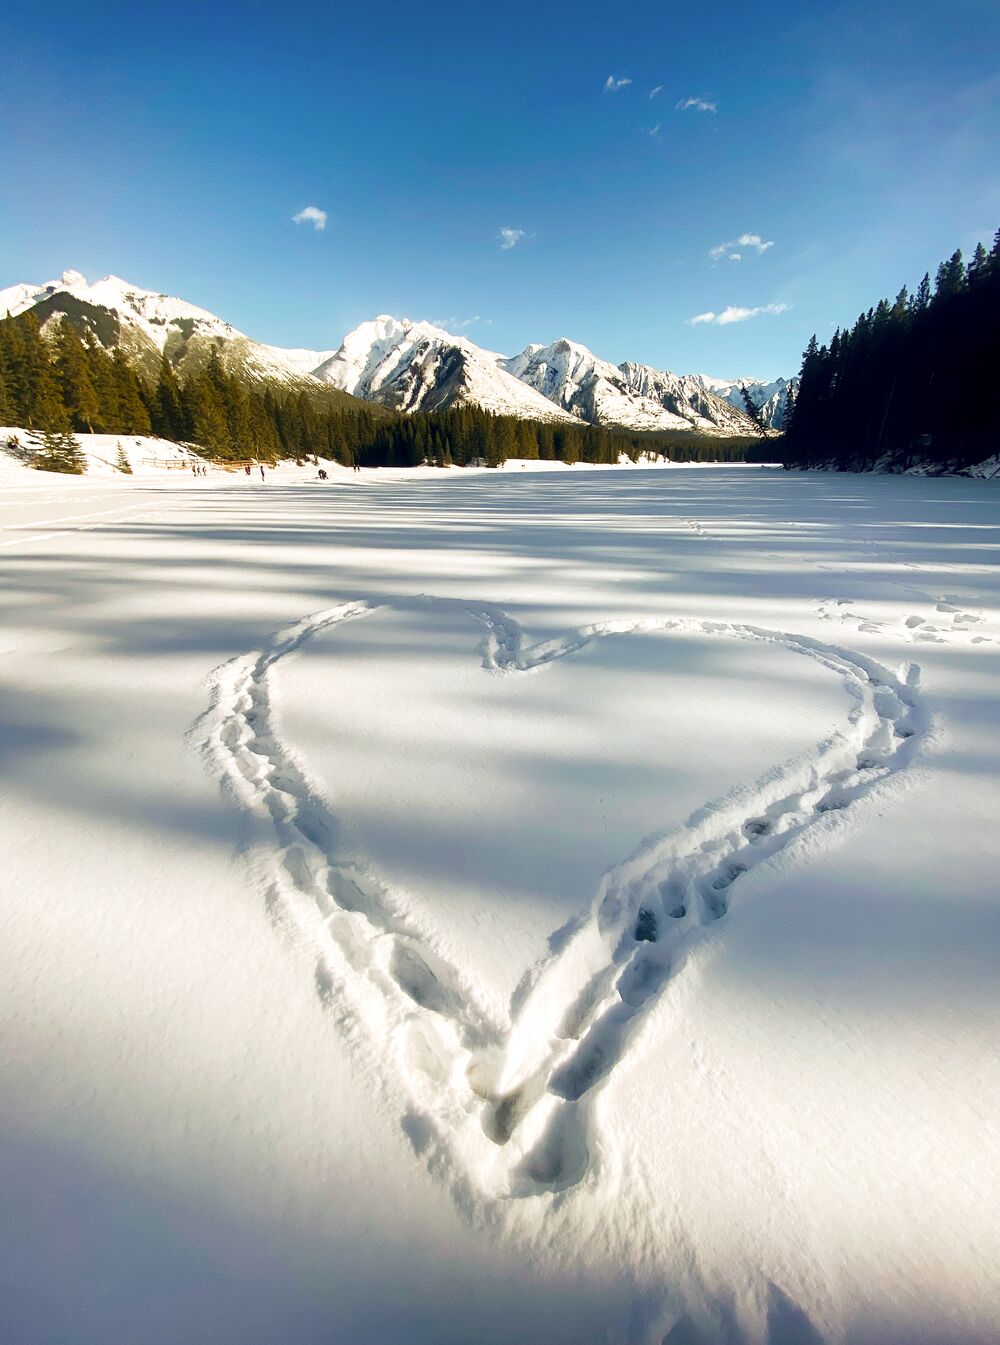 A heart that someone stepped into the snow at Johnson Lake - one of Banff's best hikes in winter.